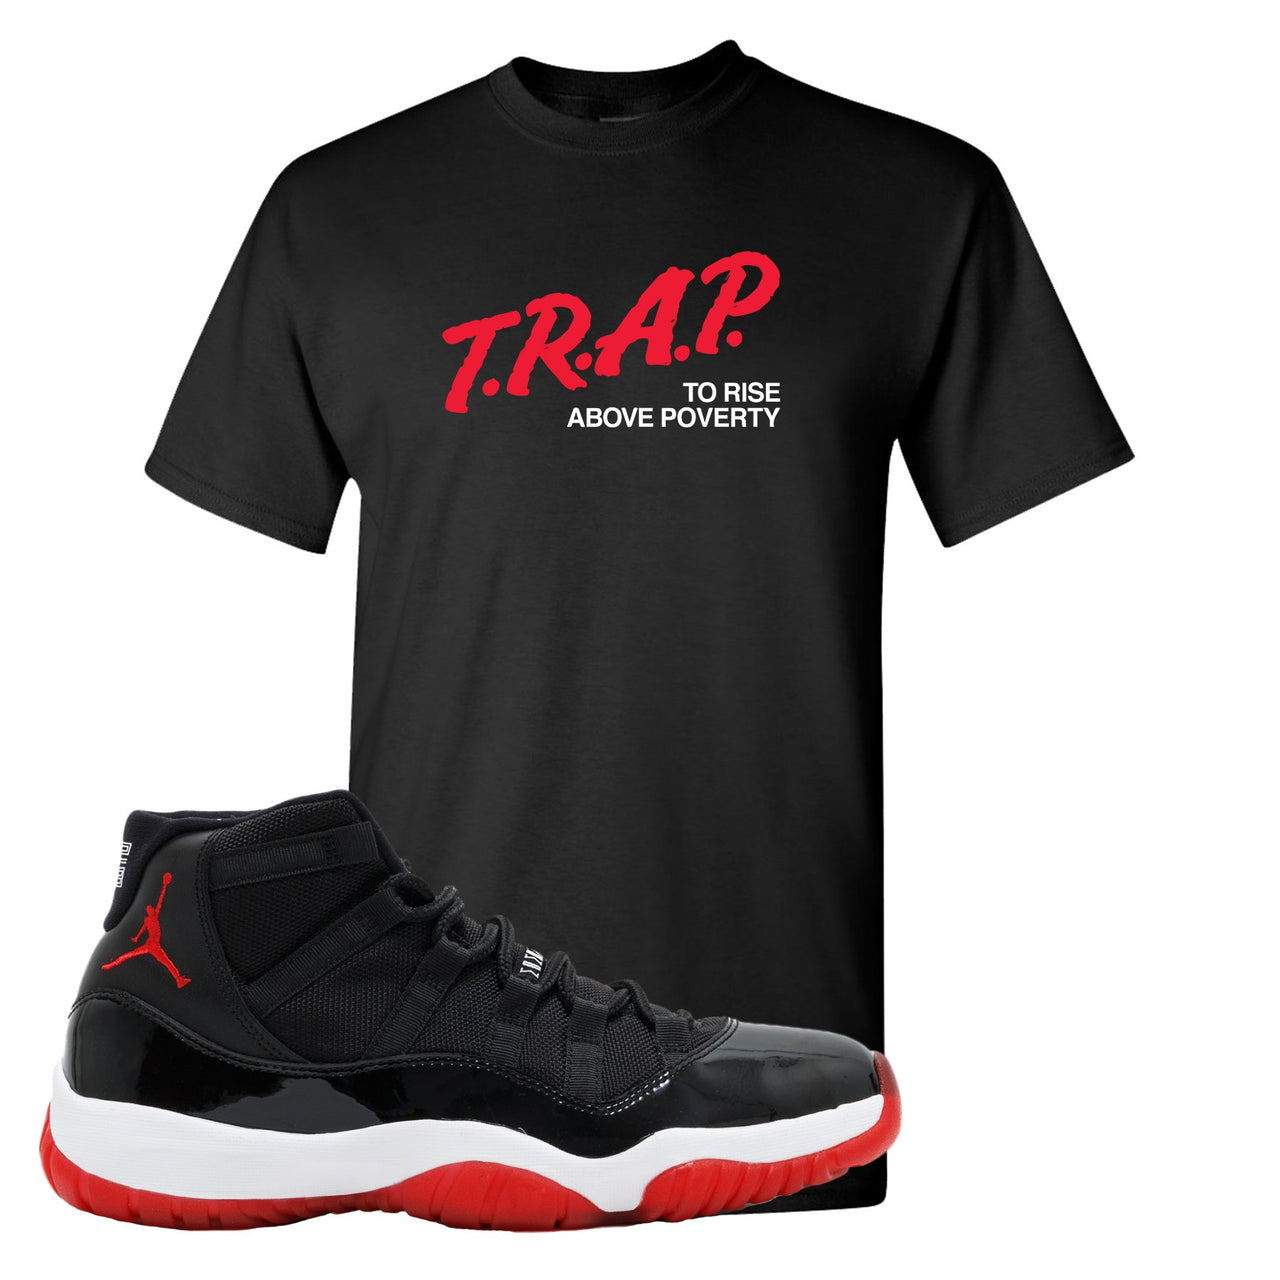 Jordan 11 Bred Trap To Rise Above Poverty Black Sneaker Hook Up T-Shirt